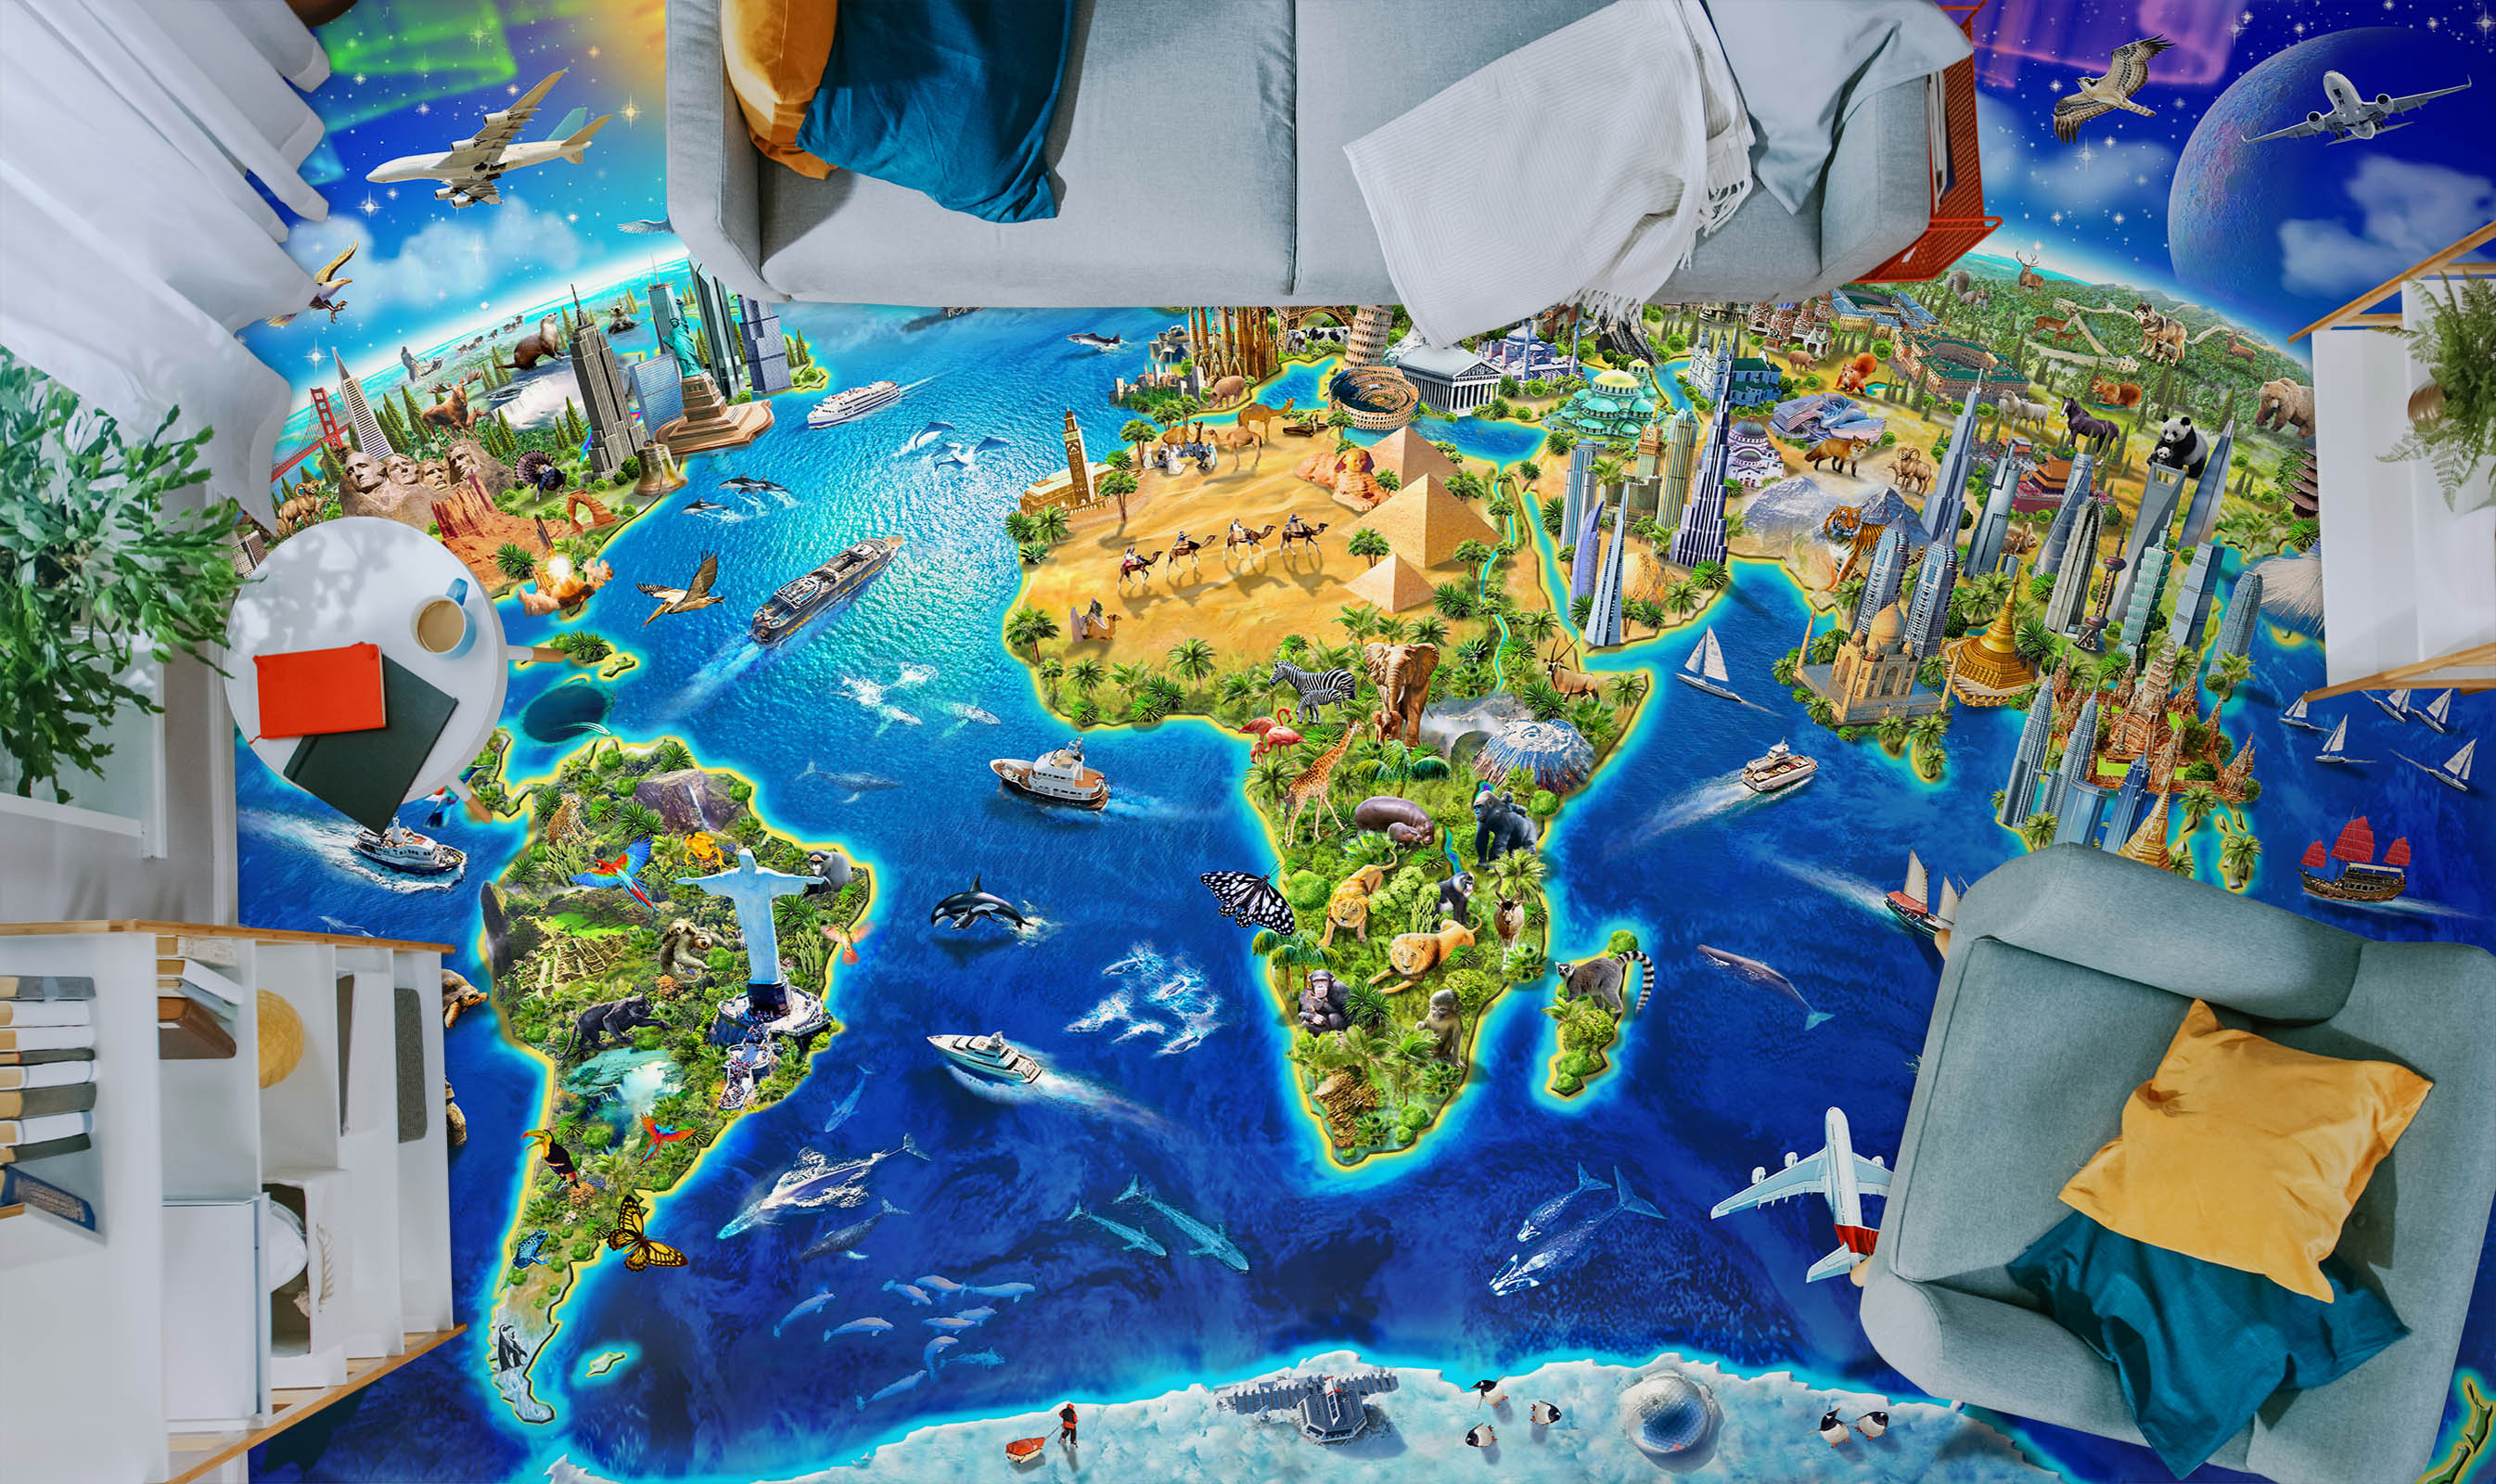 3D Earth Map 98169 Adrian Chesterman Floor Mural  Wallpaper Murals Self-Adhesive Removable Print Epoxy